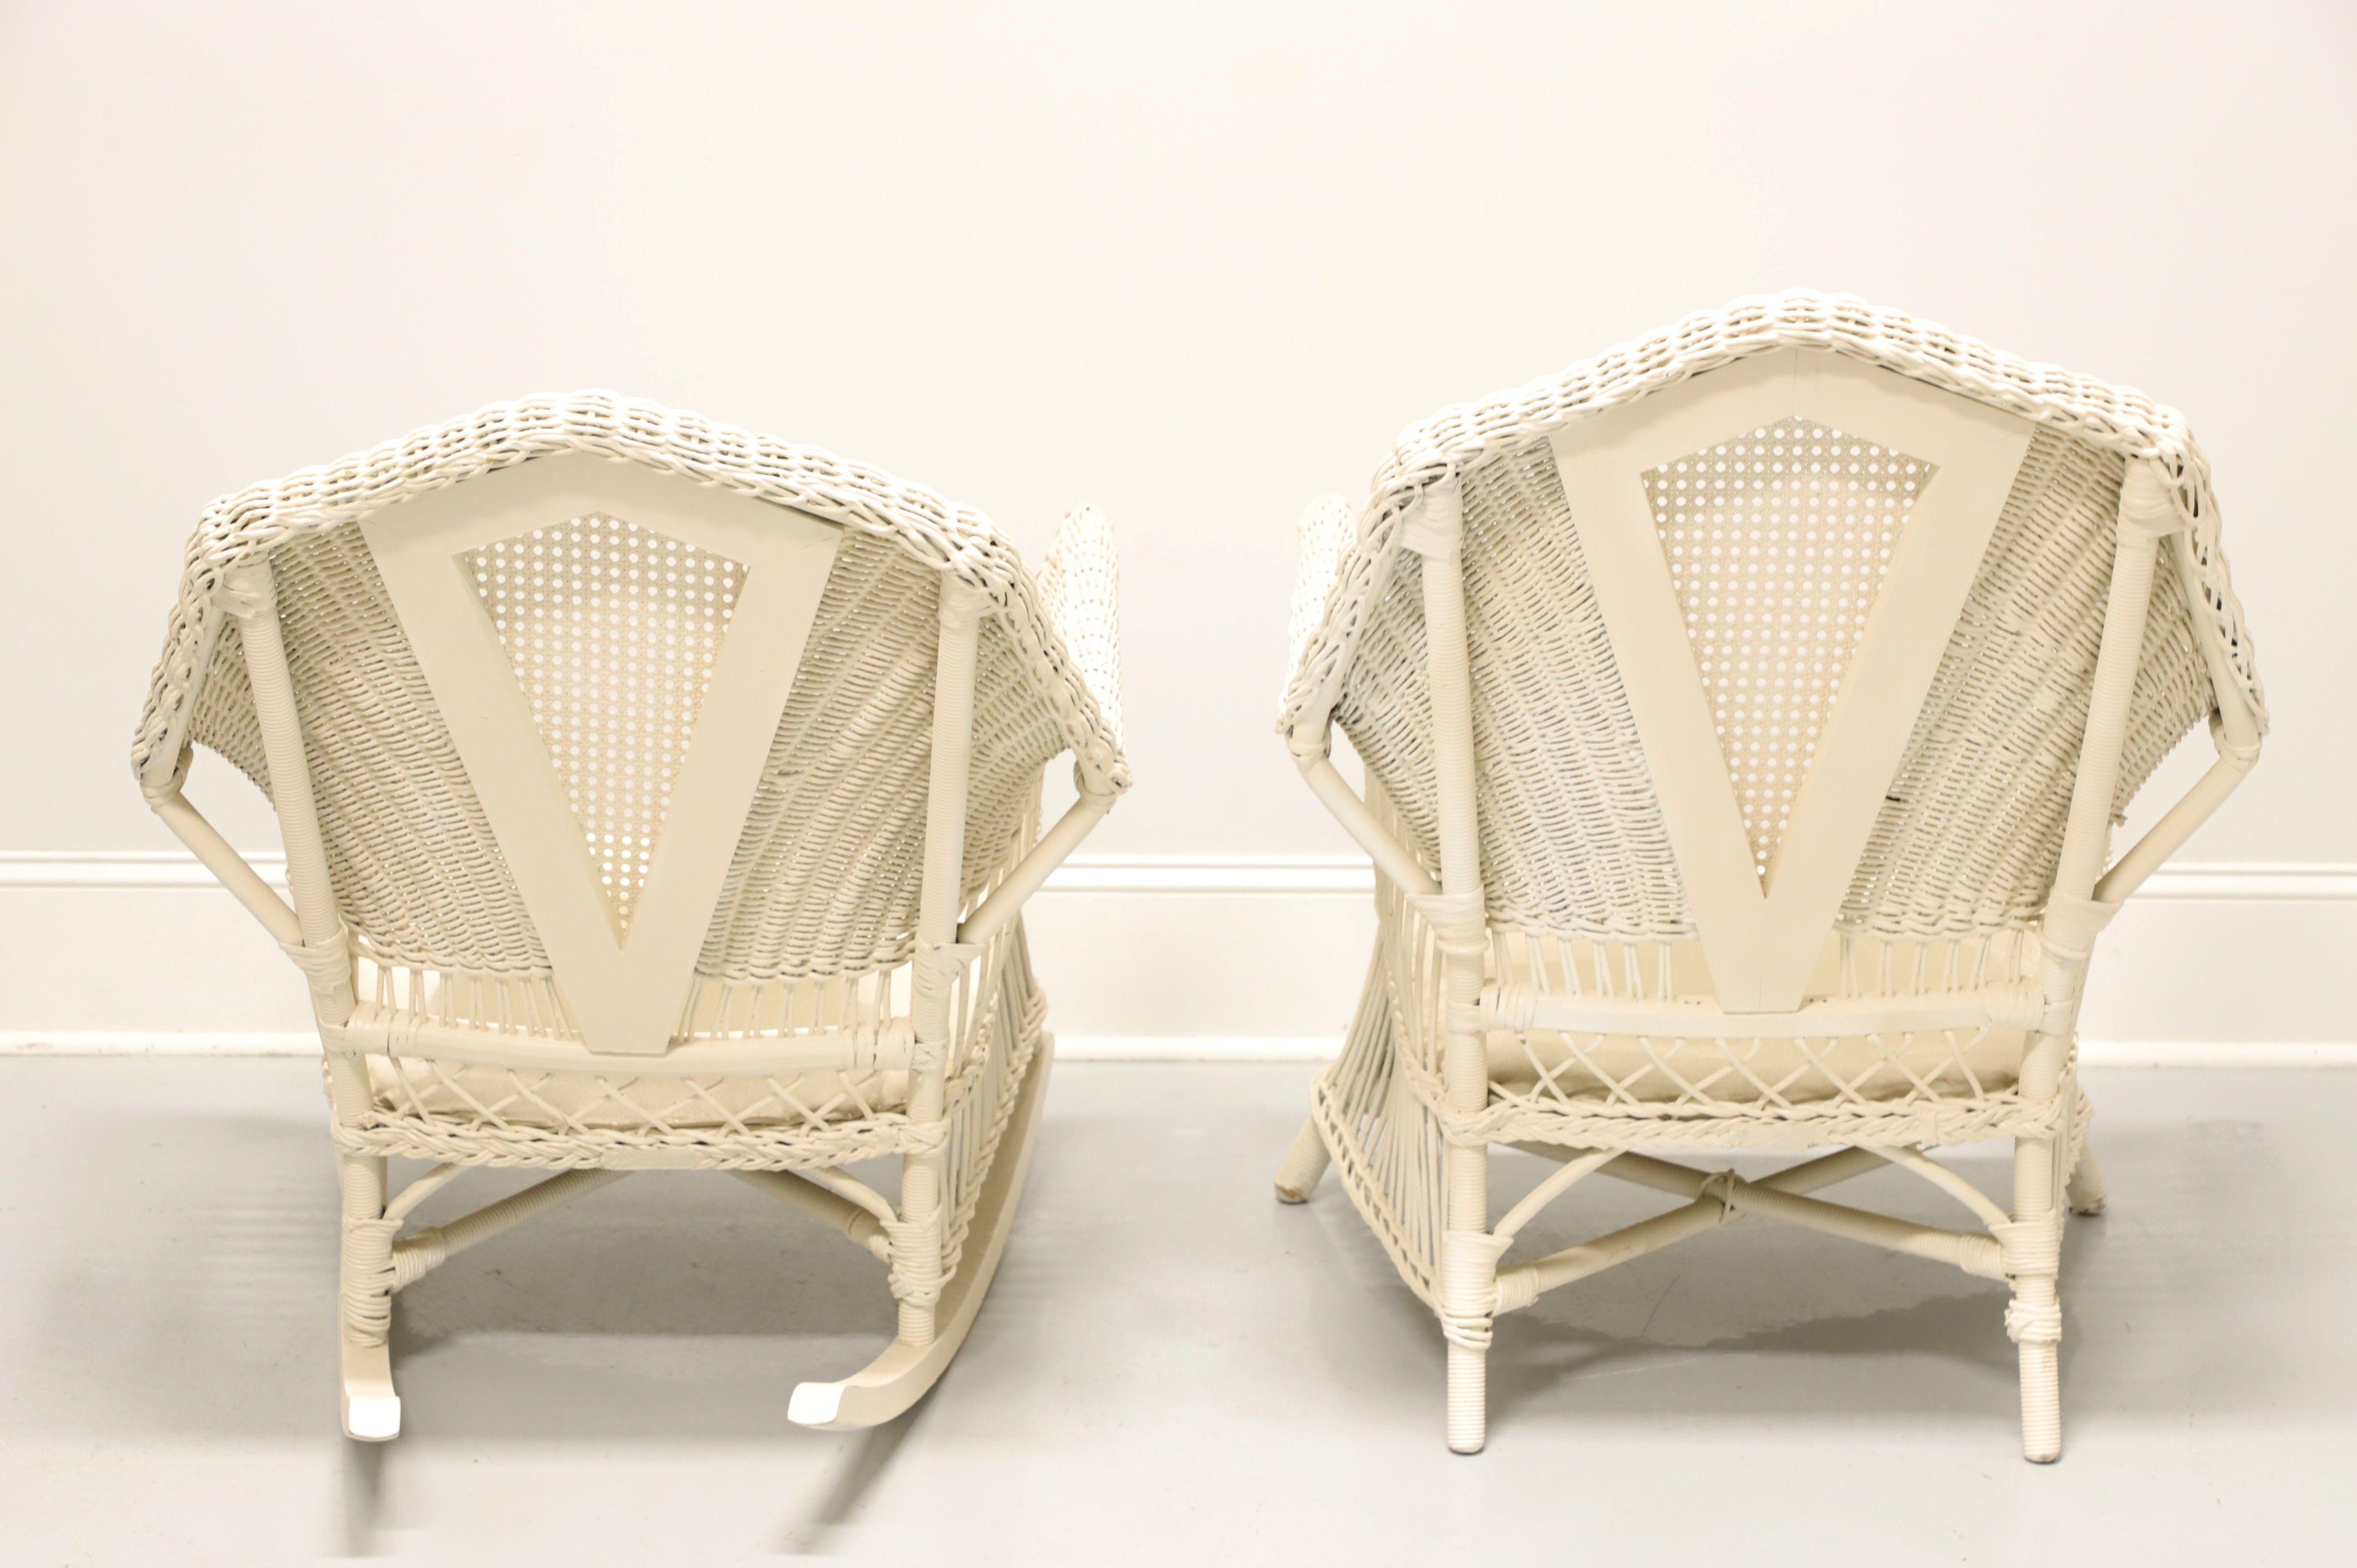 antique wicker settee and rockers